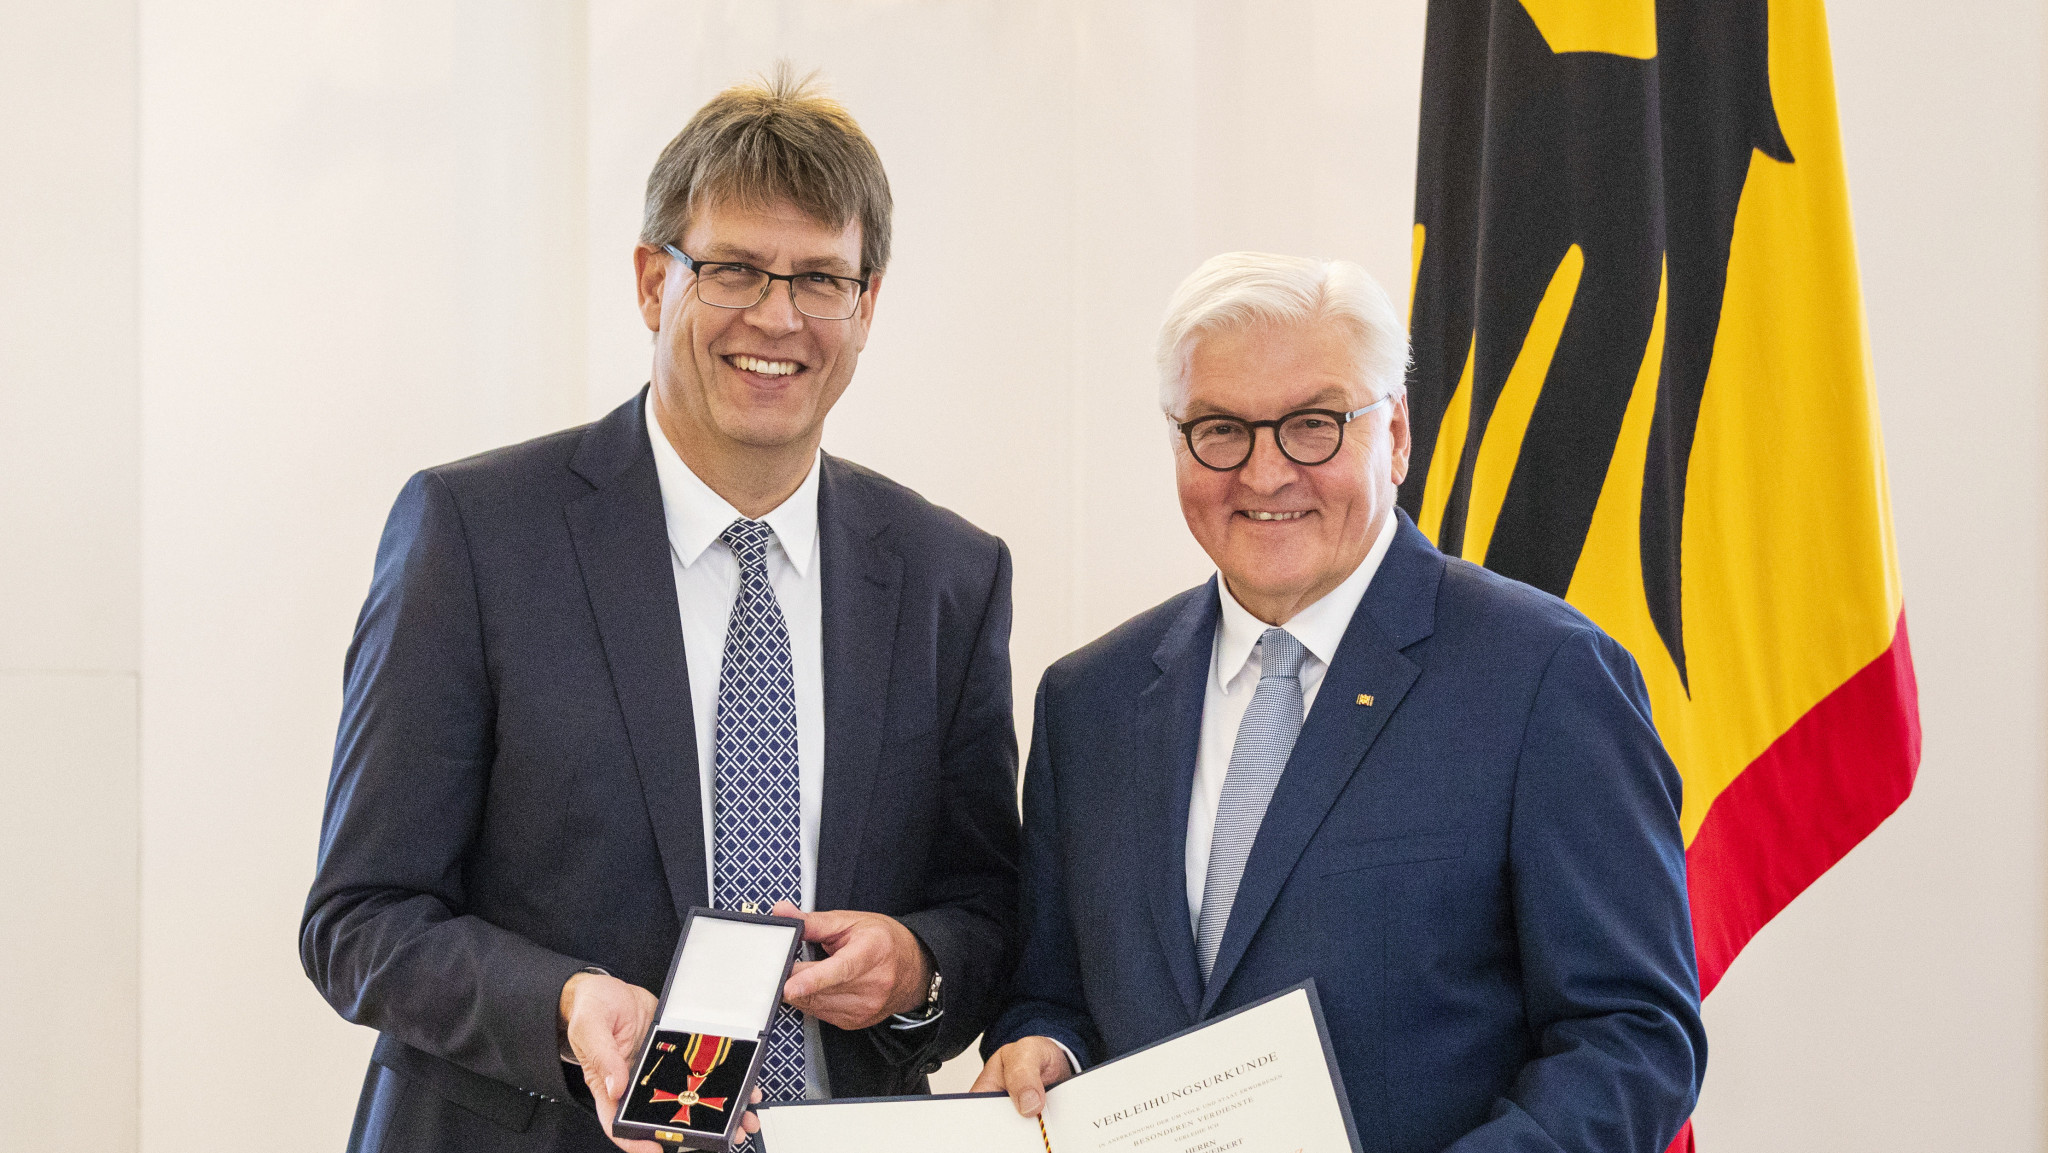 ITTF President awarded special honour by German Federal President